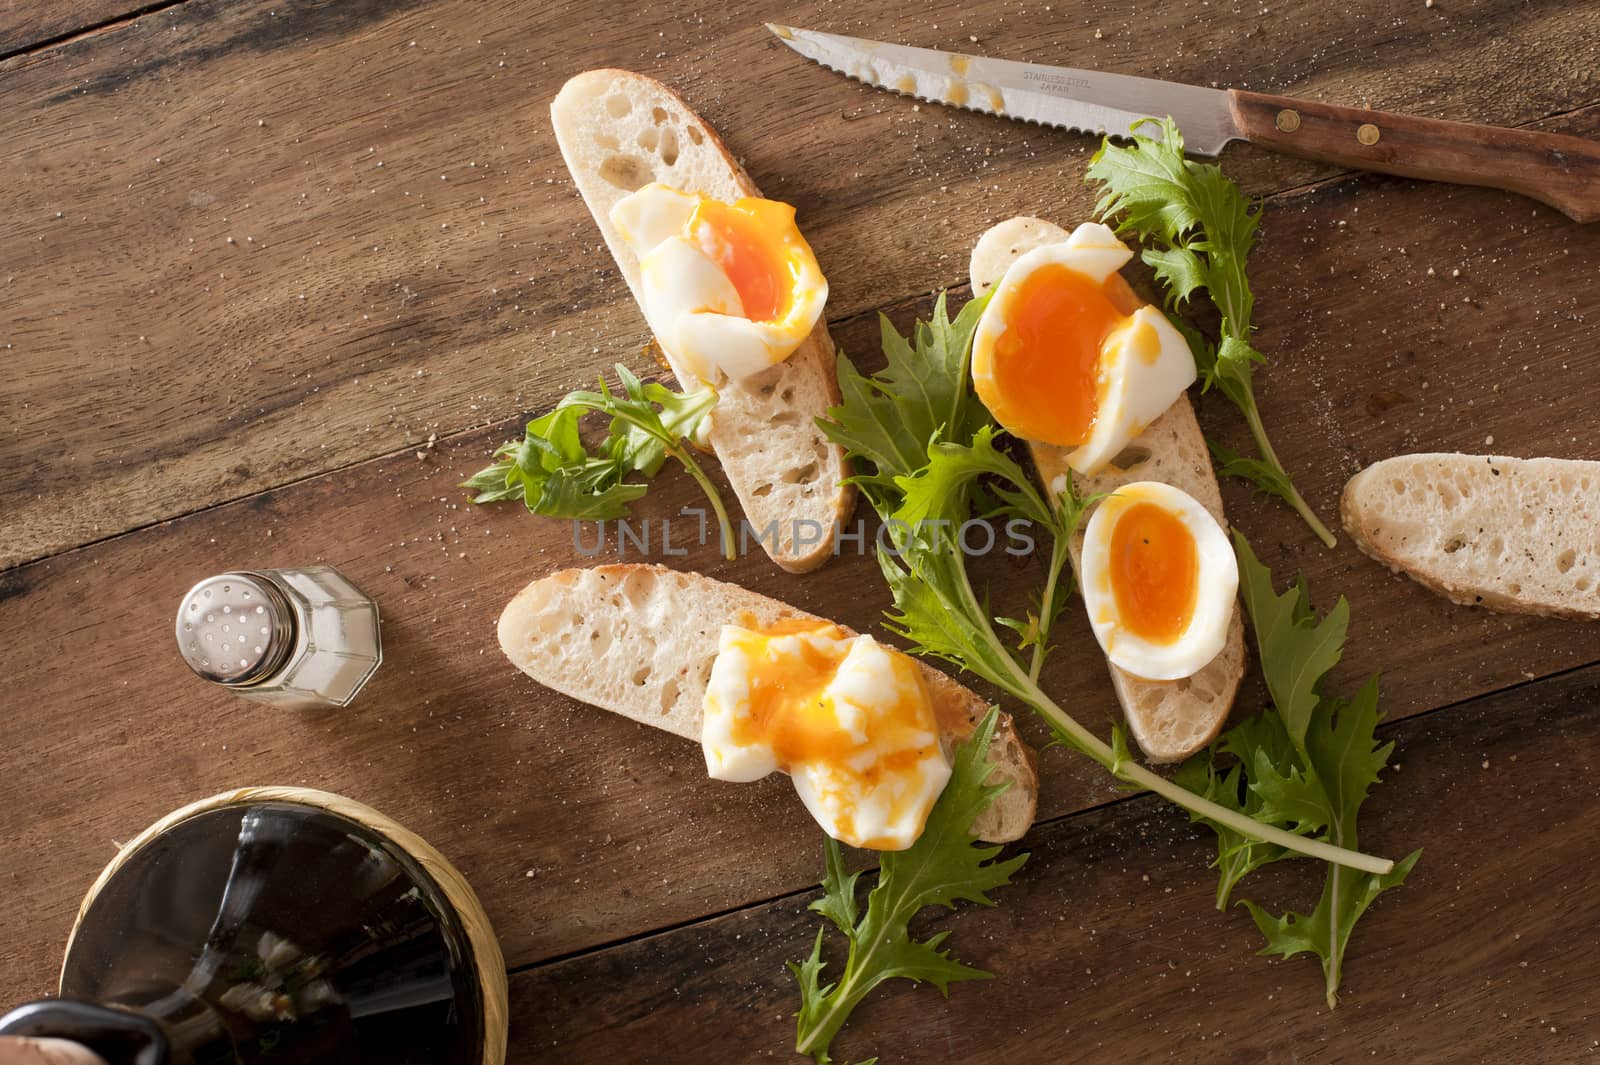 Bread soldiers with soft-boiled eggs, thin strips of toasts with greens and knife over wooden table